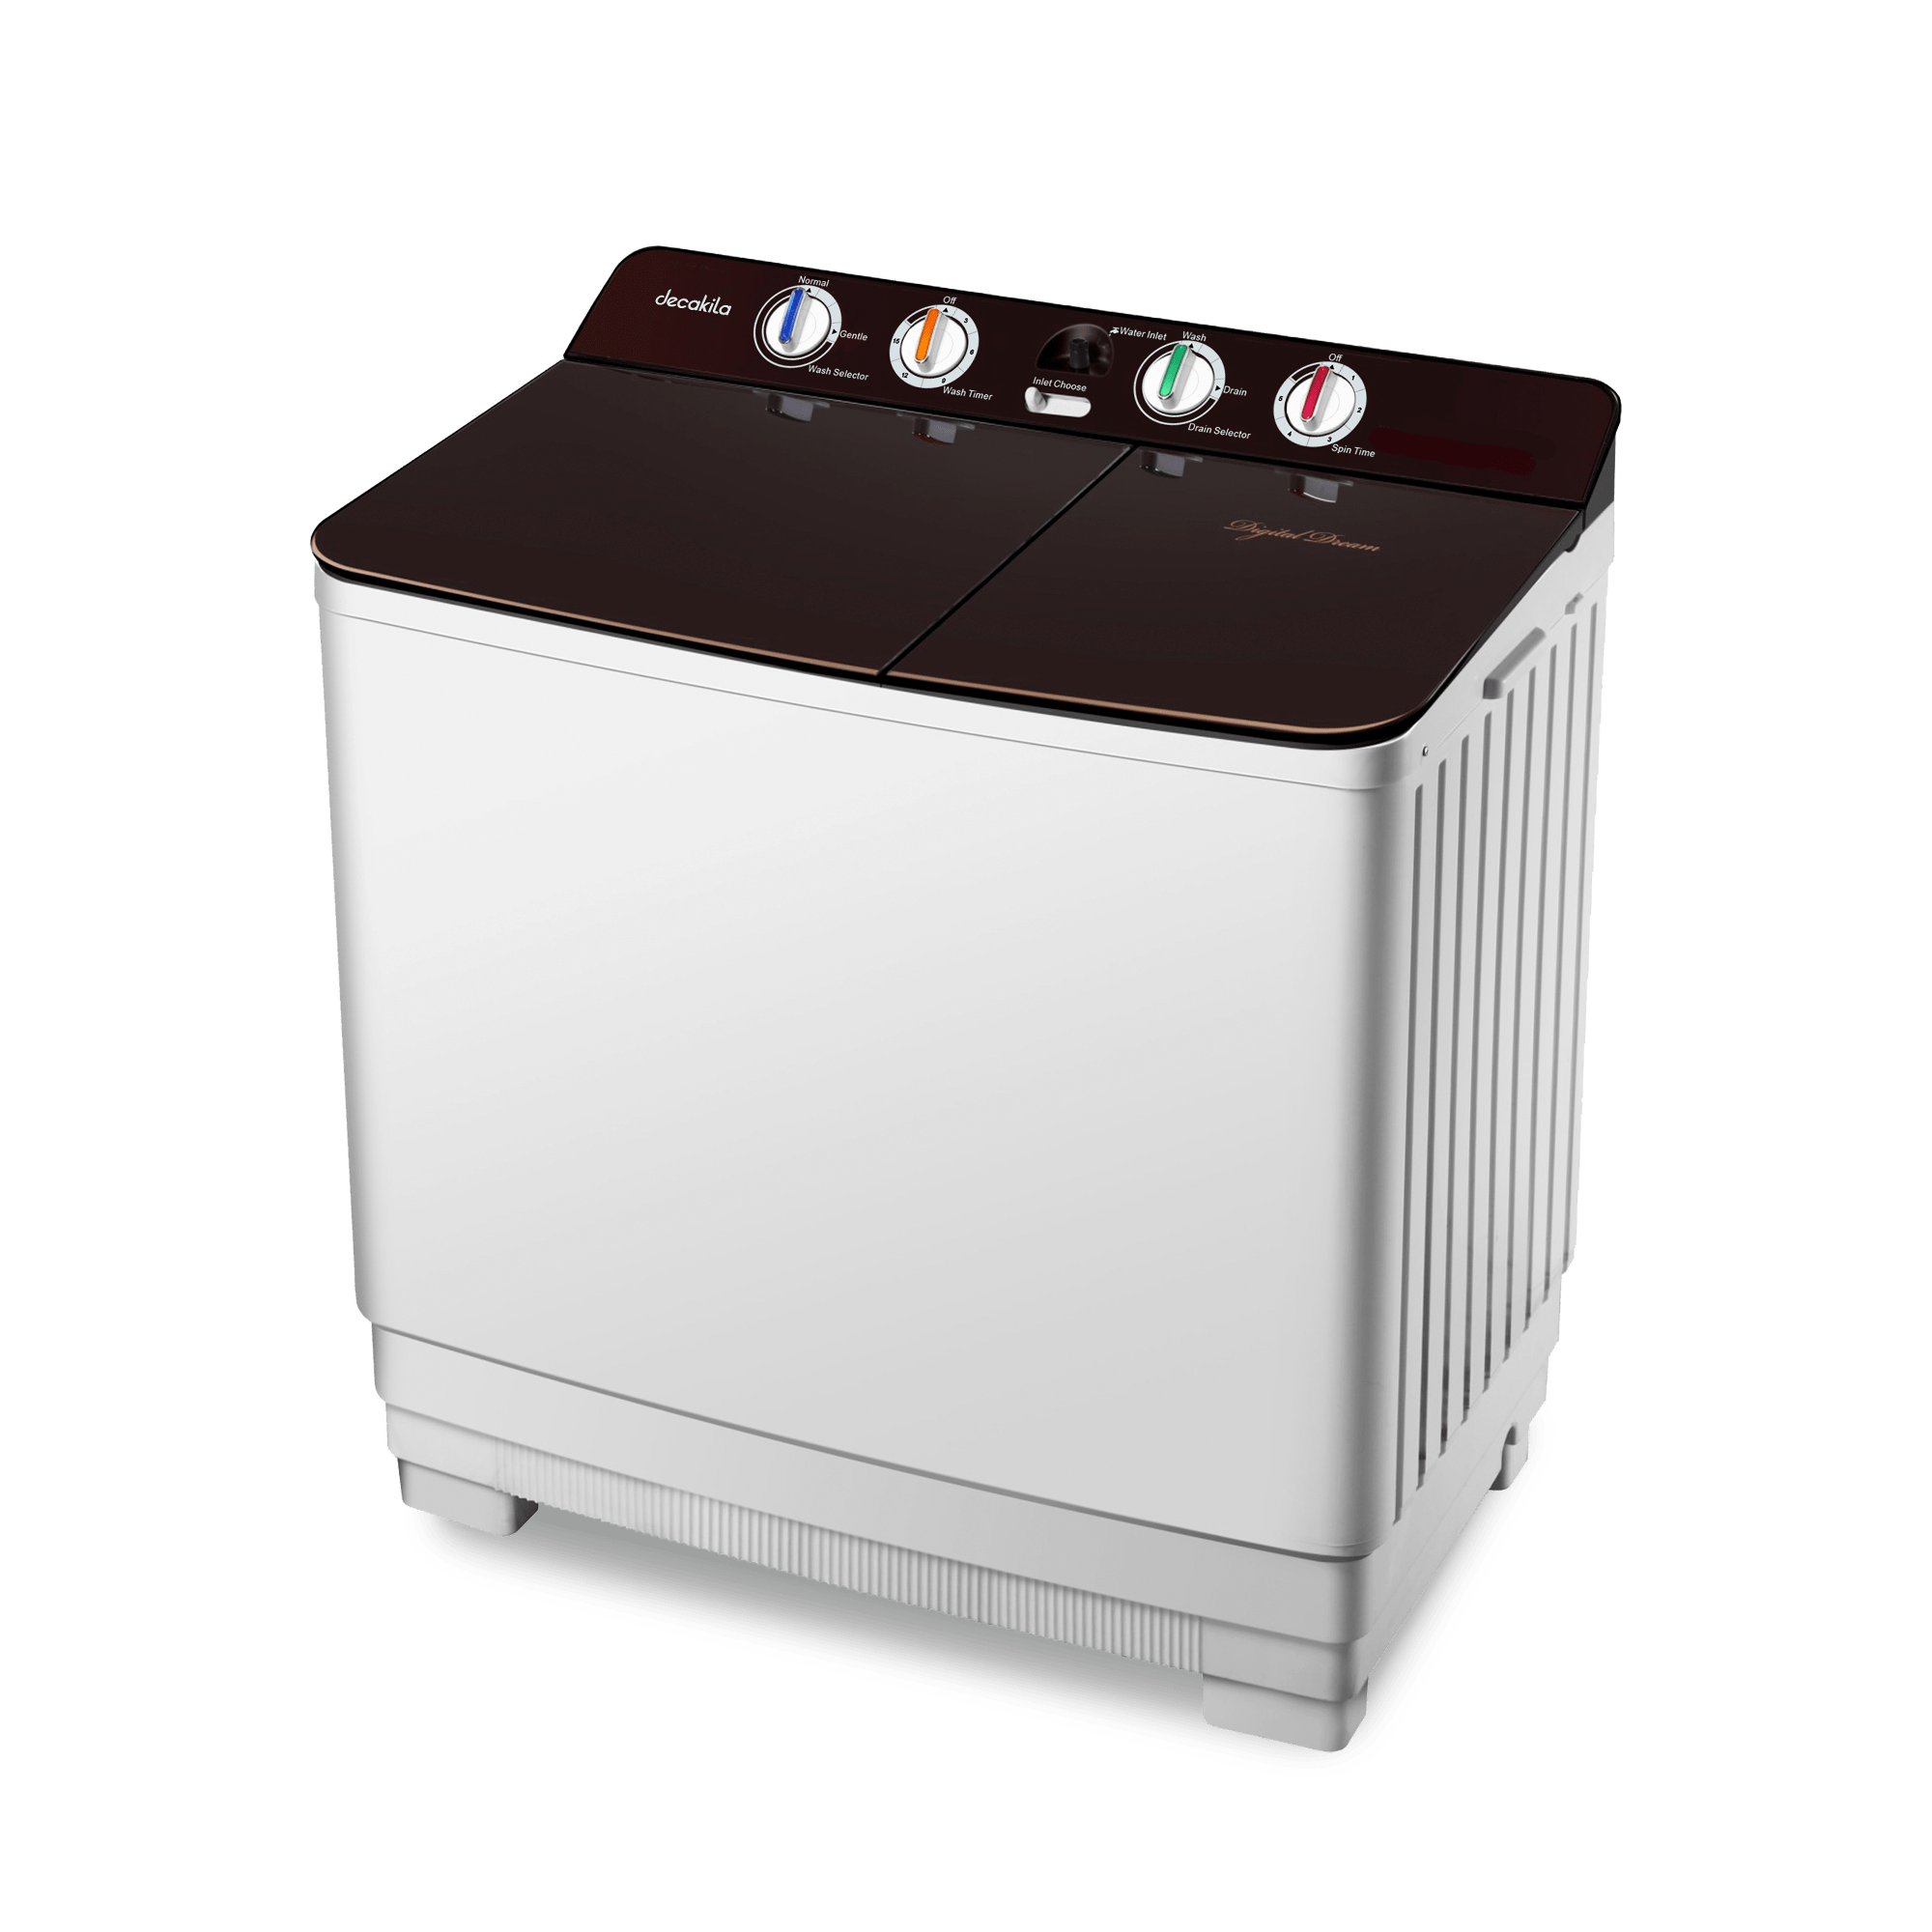 Decakila Twin Tub Washing Machine - KEDM002W | Buy Online in Accra, Ghana - Supply Master Home Accessories Buy Tools hardware Building materials